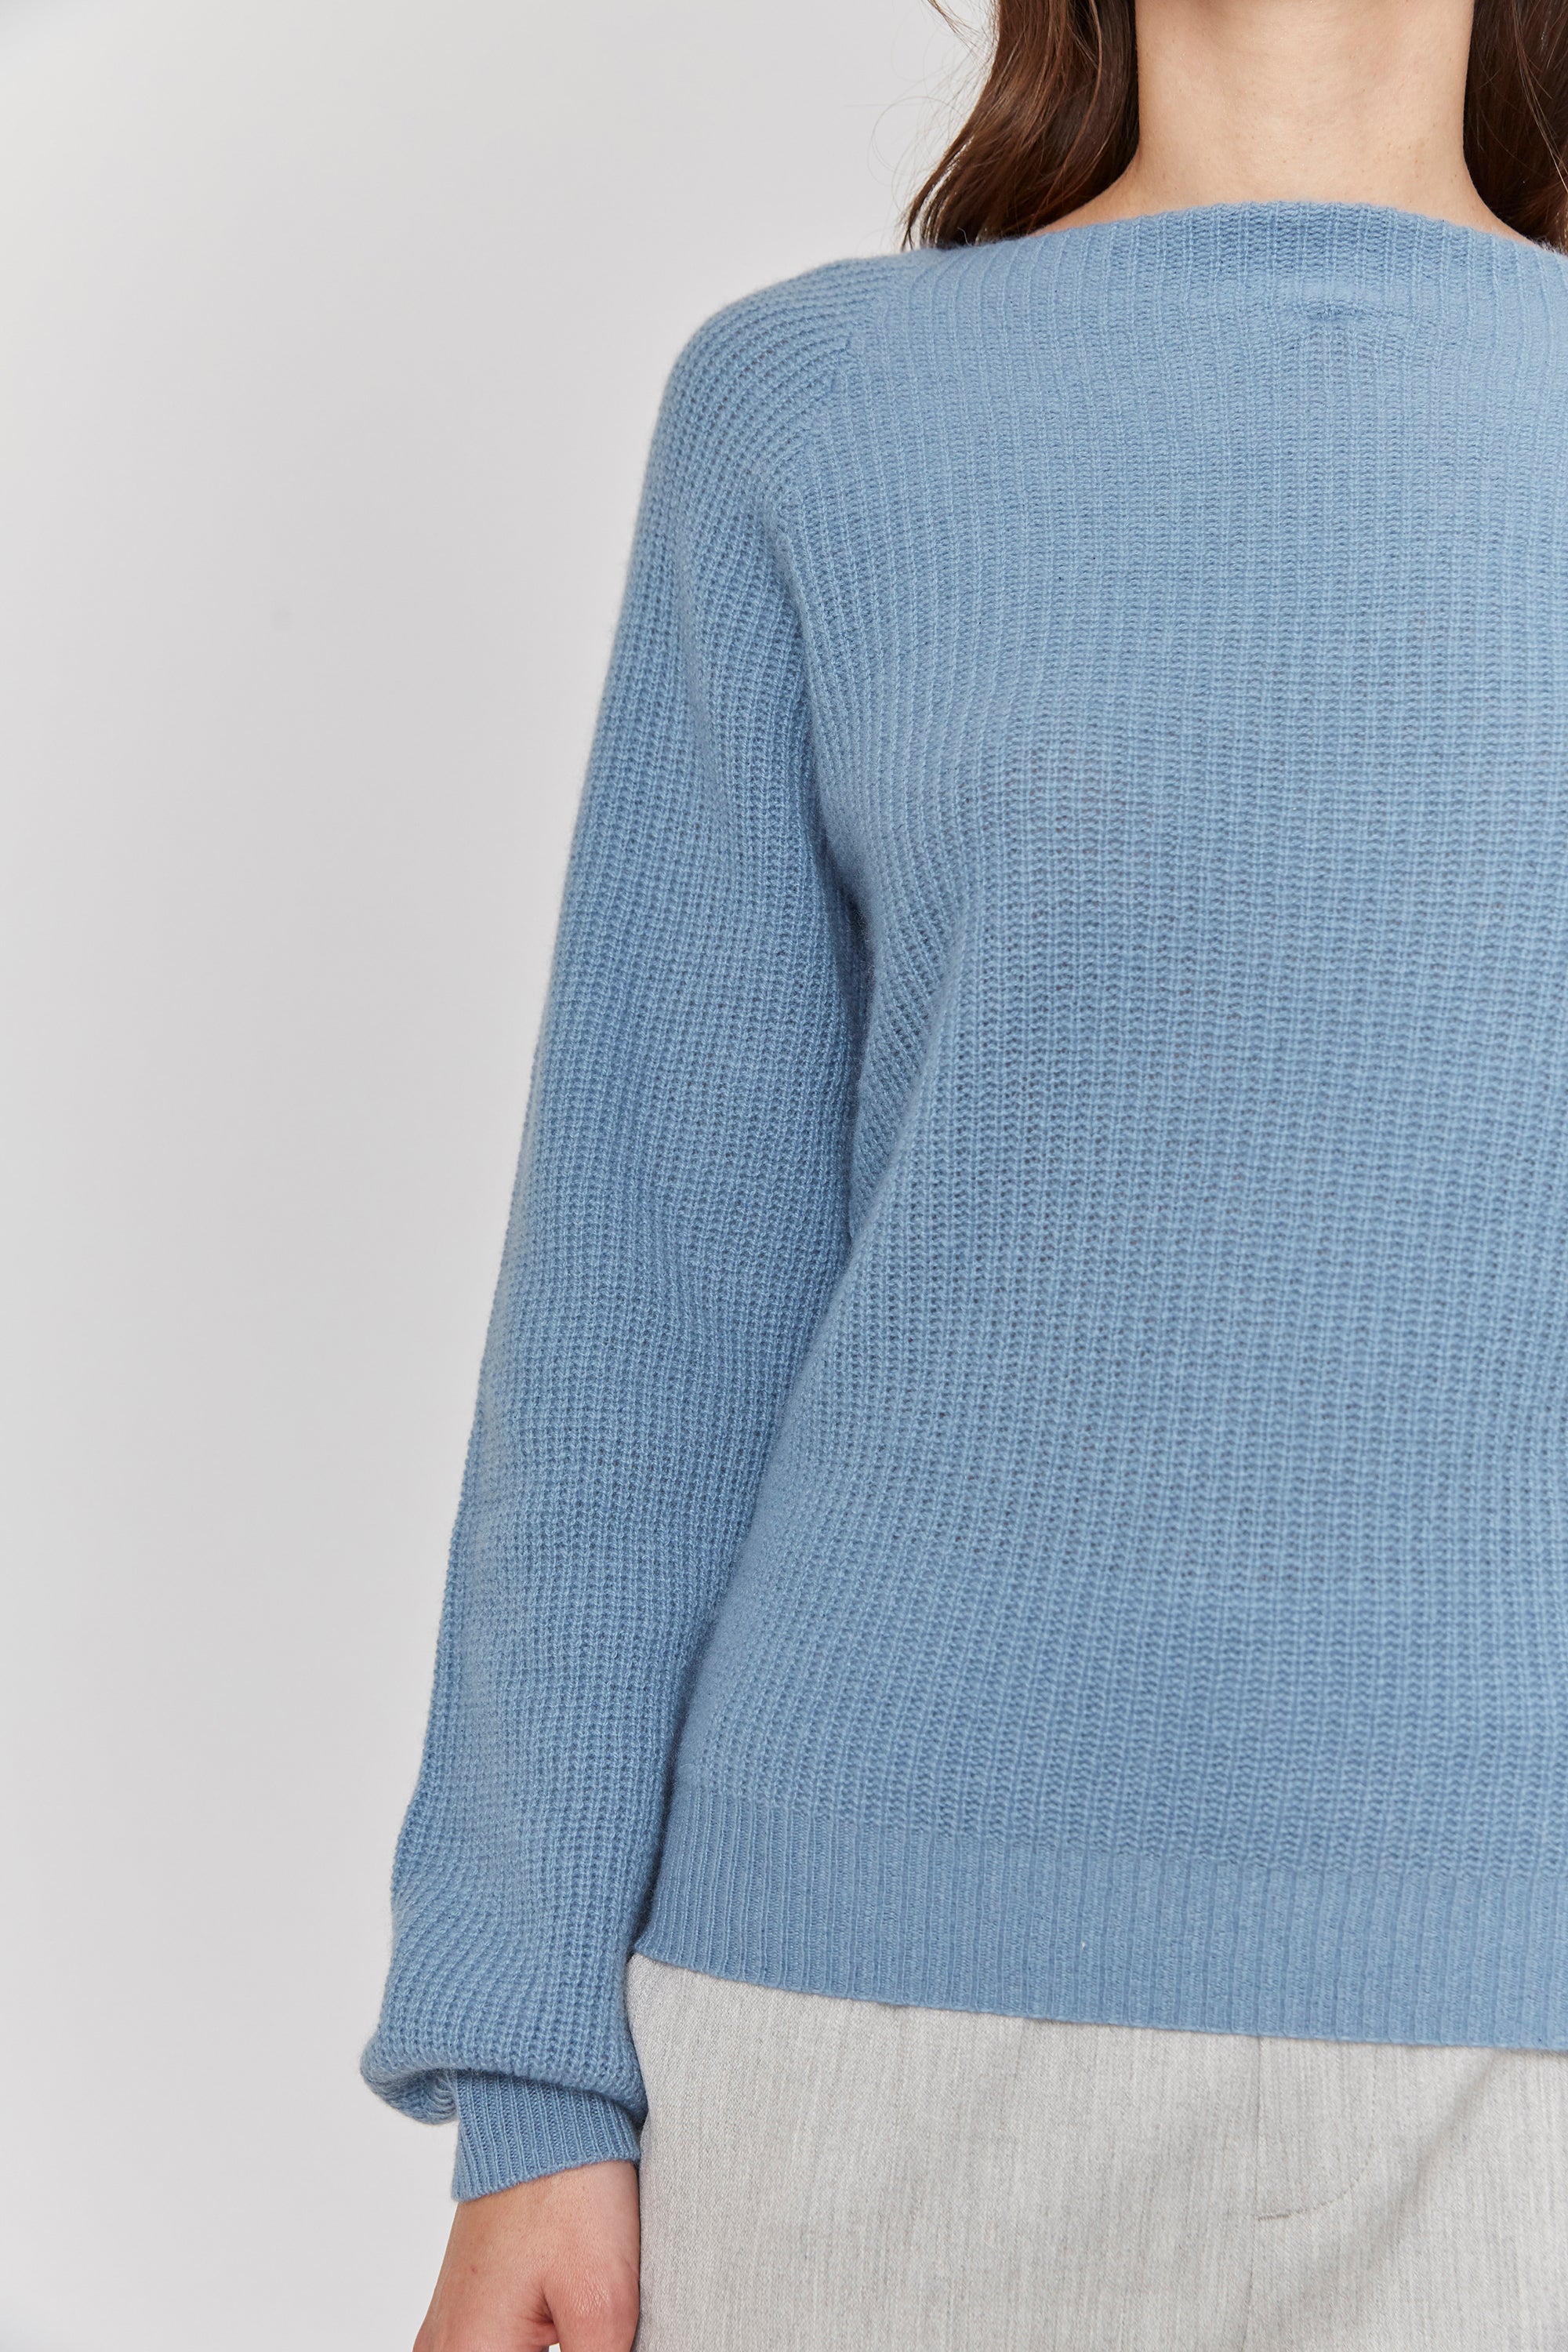 women blue relax casual  boat neck bateau neck cashmere sweater top layer knitwear